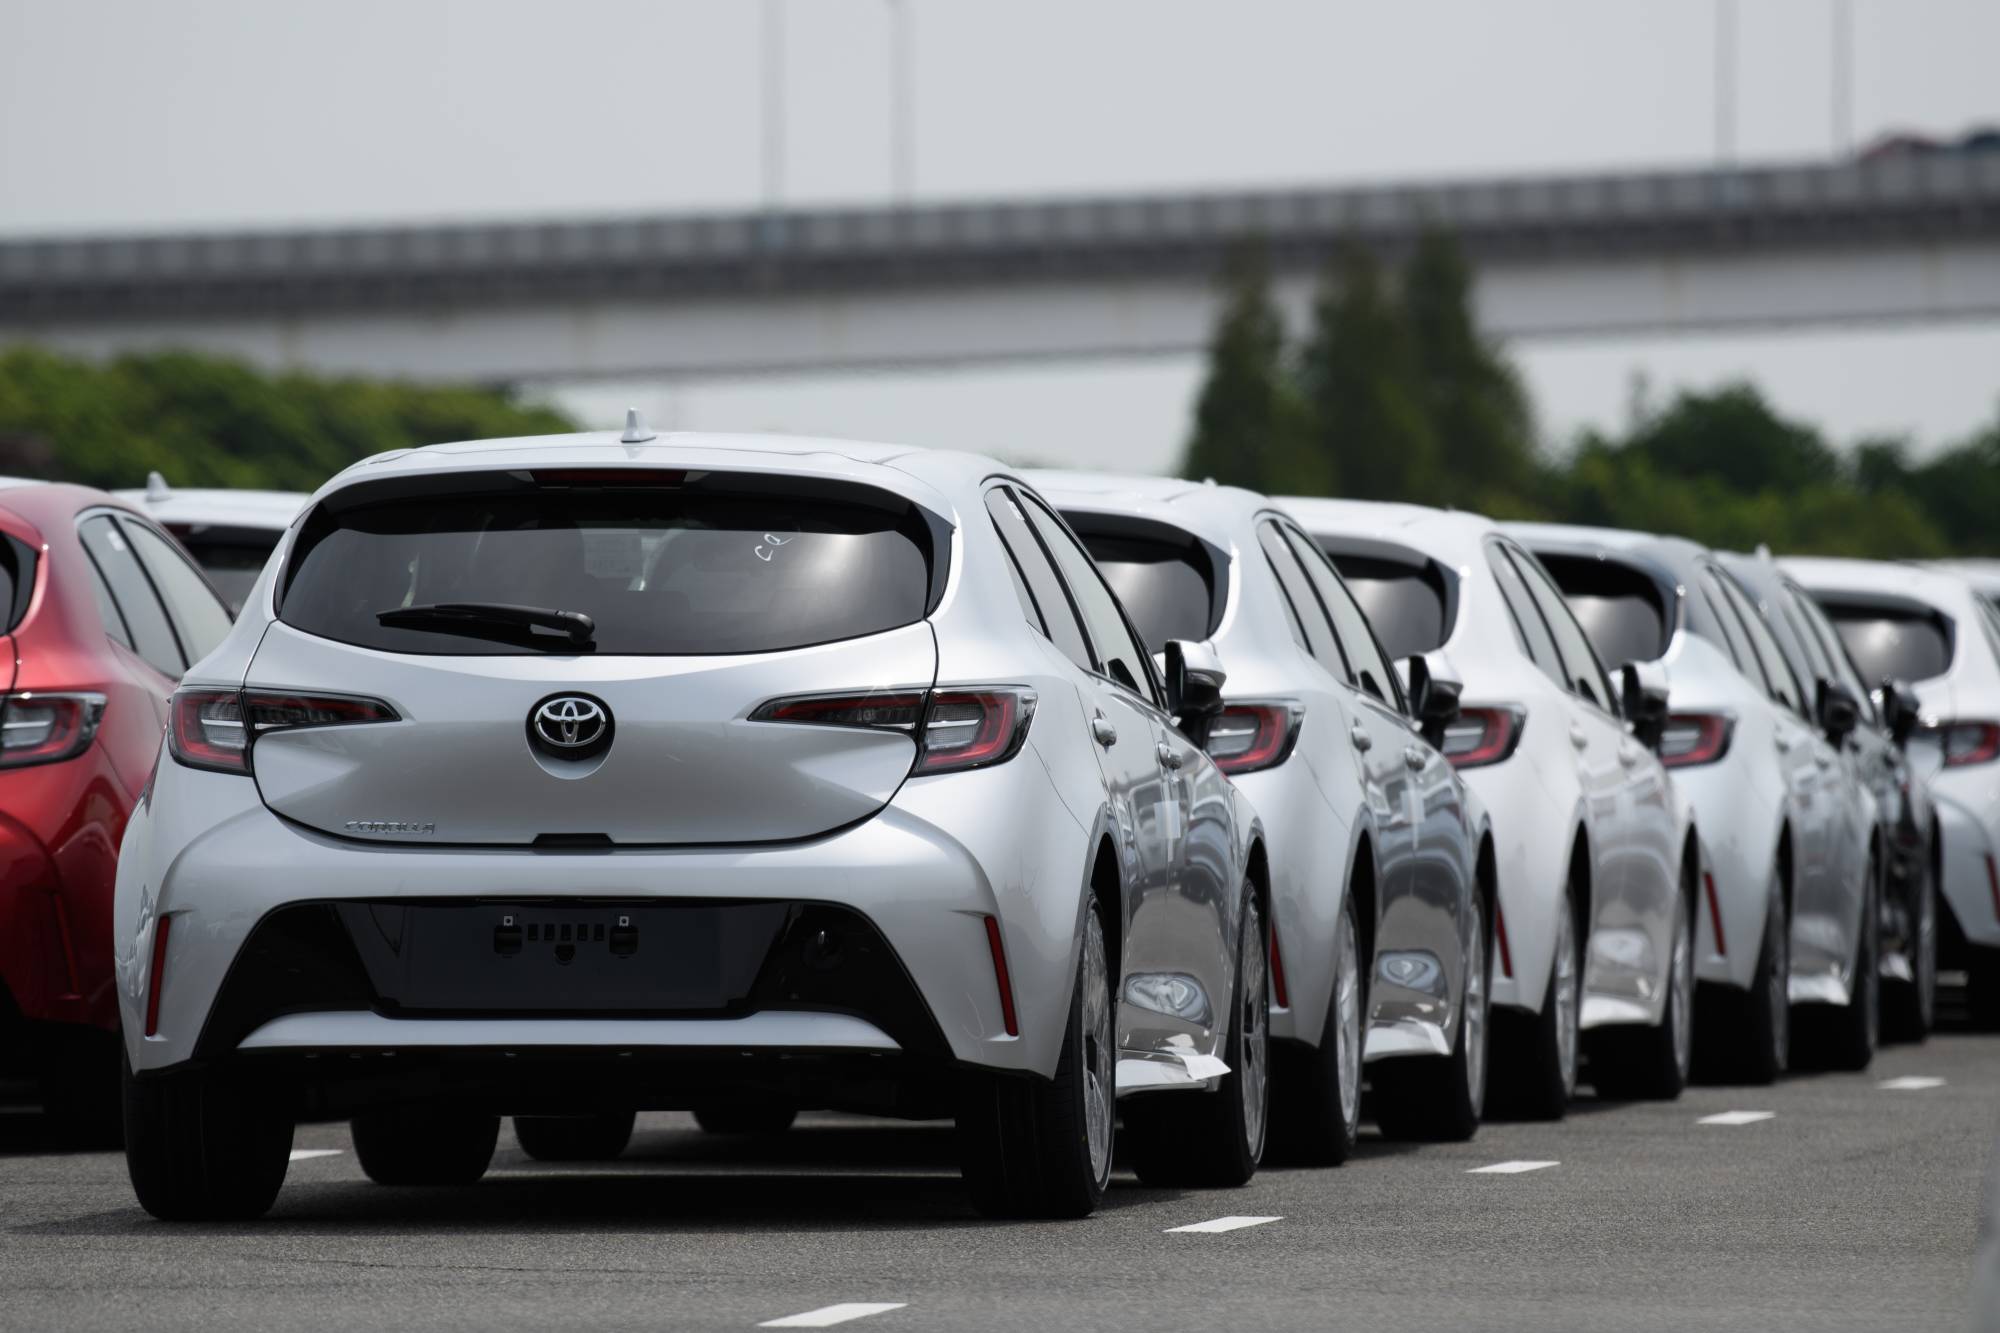 Toyota Motor Corp. Corolla vehicles bound for shipment at the Nagoya port last month | BLOOMBERG